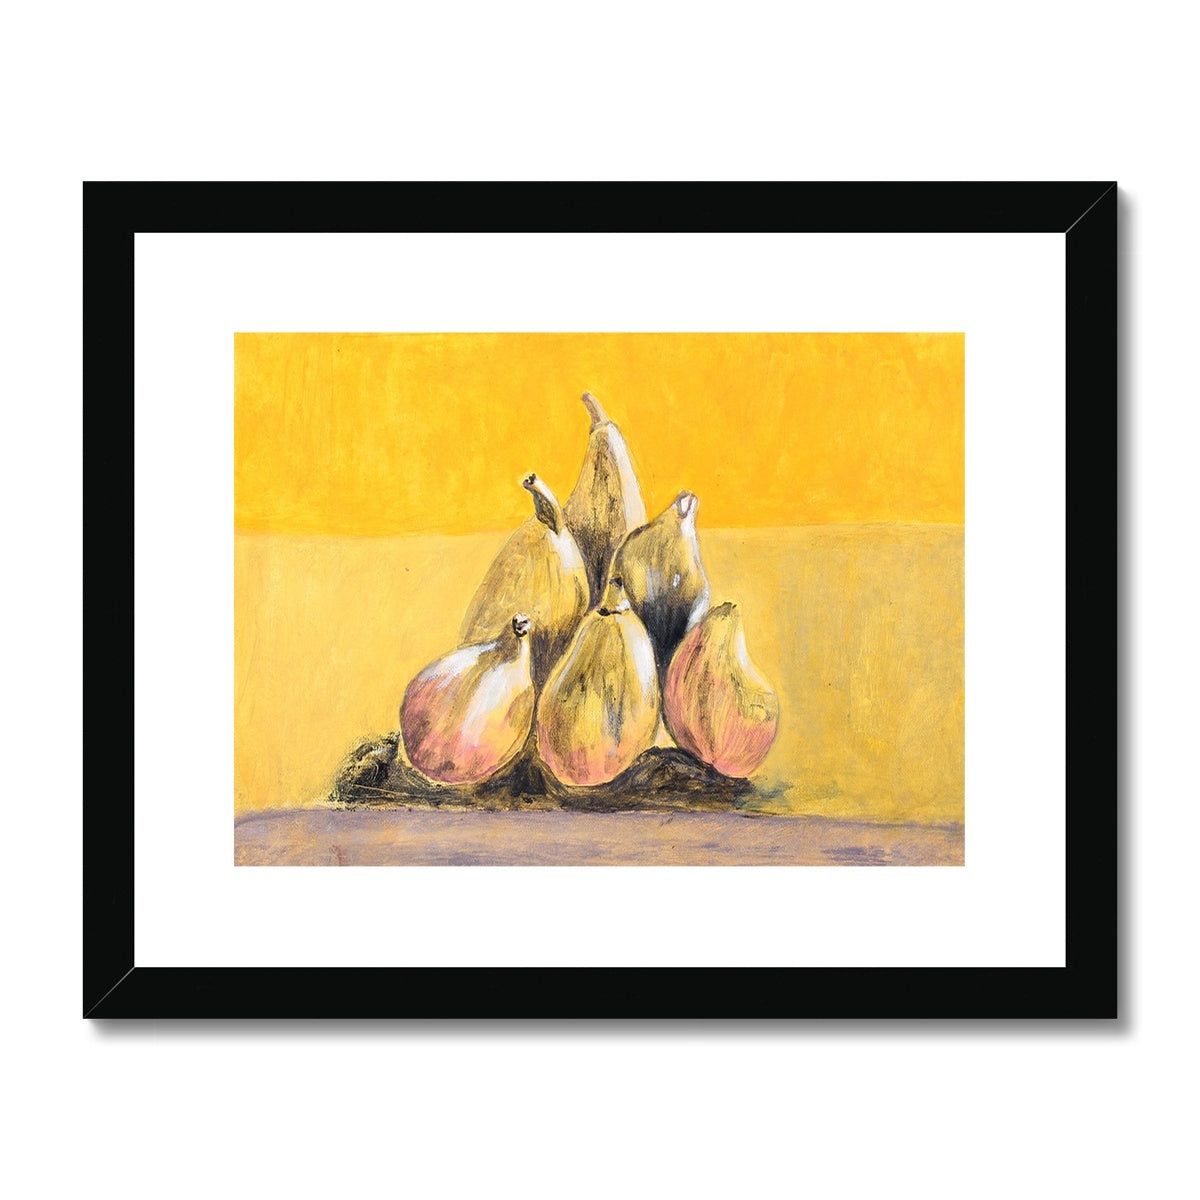 Yellow figs, Framed & Mounted Print